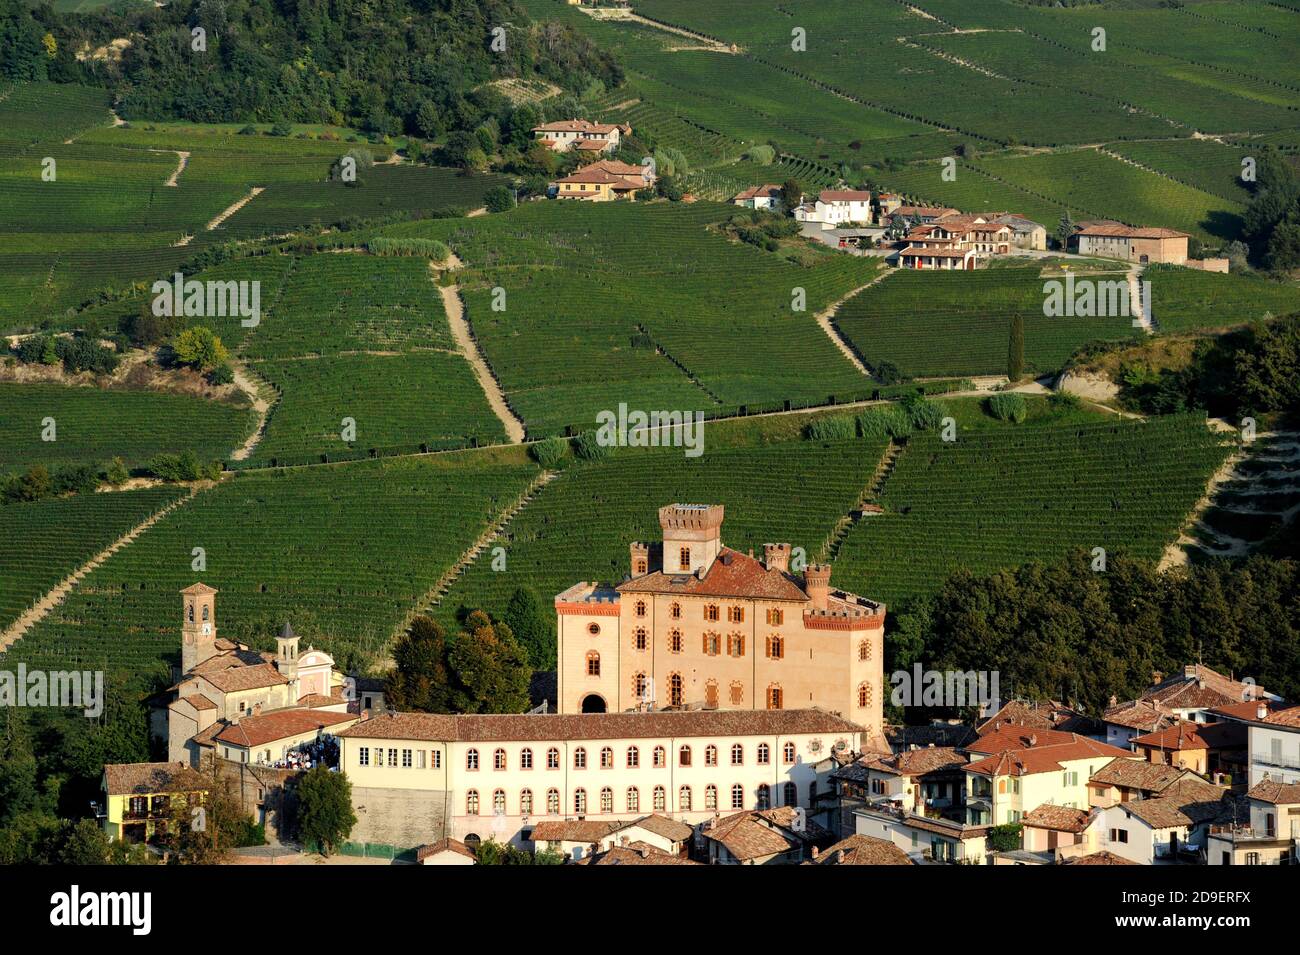 The Barolo's castle surrounded by vineyards of the famous Barolo wine, in Piemonte, Italy. Stock Photo